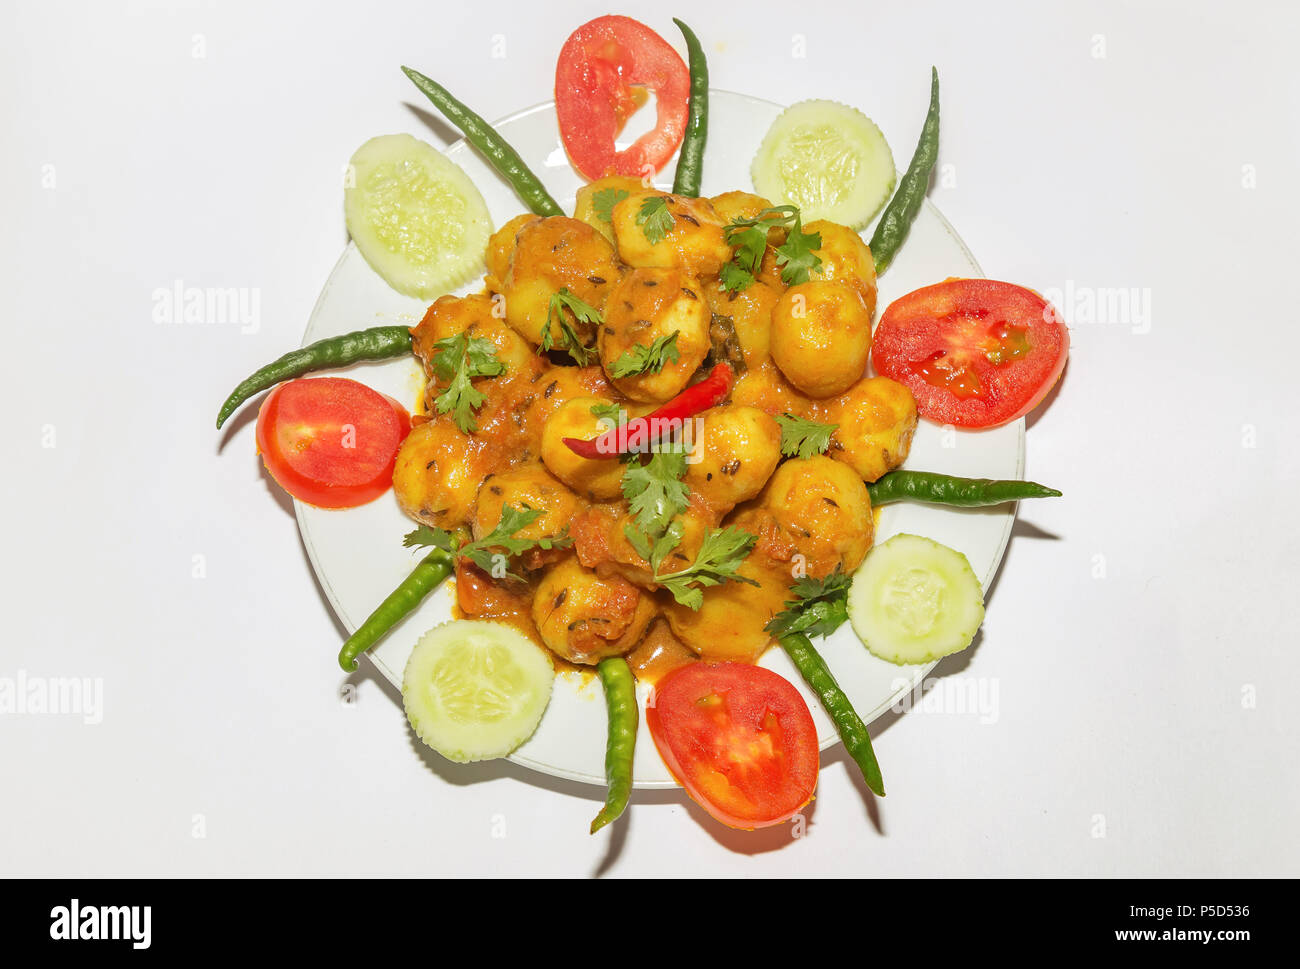 Spicy Indian vegetarian food prepared with small potatoes popularly known as Dum Aloo garnished with cucumber, tomato and green chili. Stock Photo